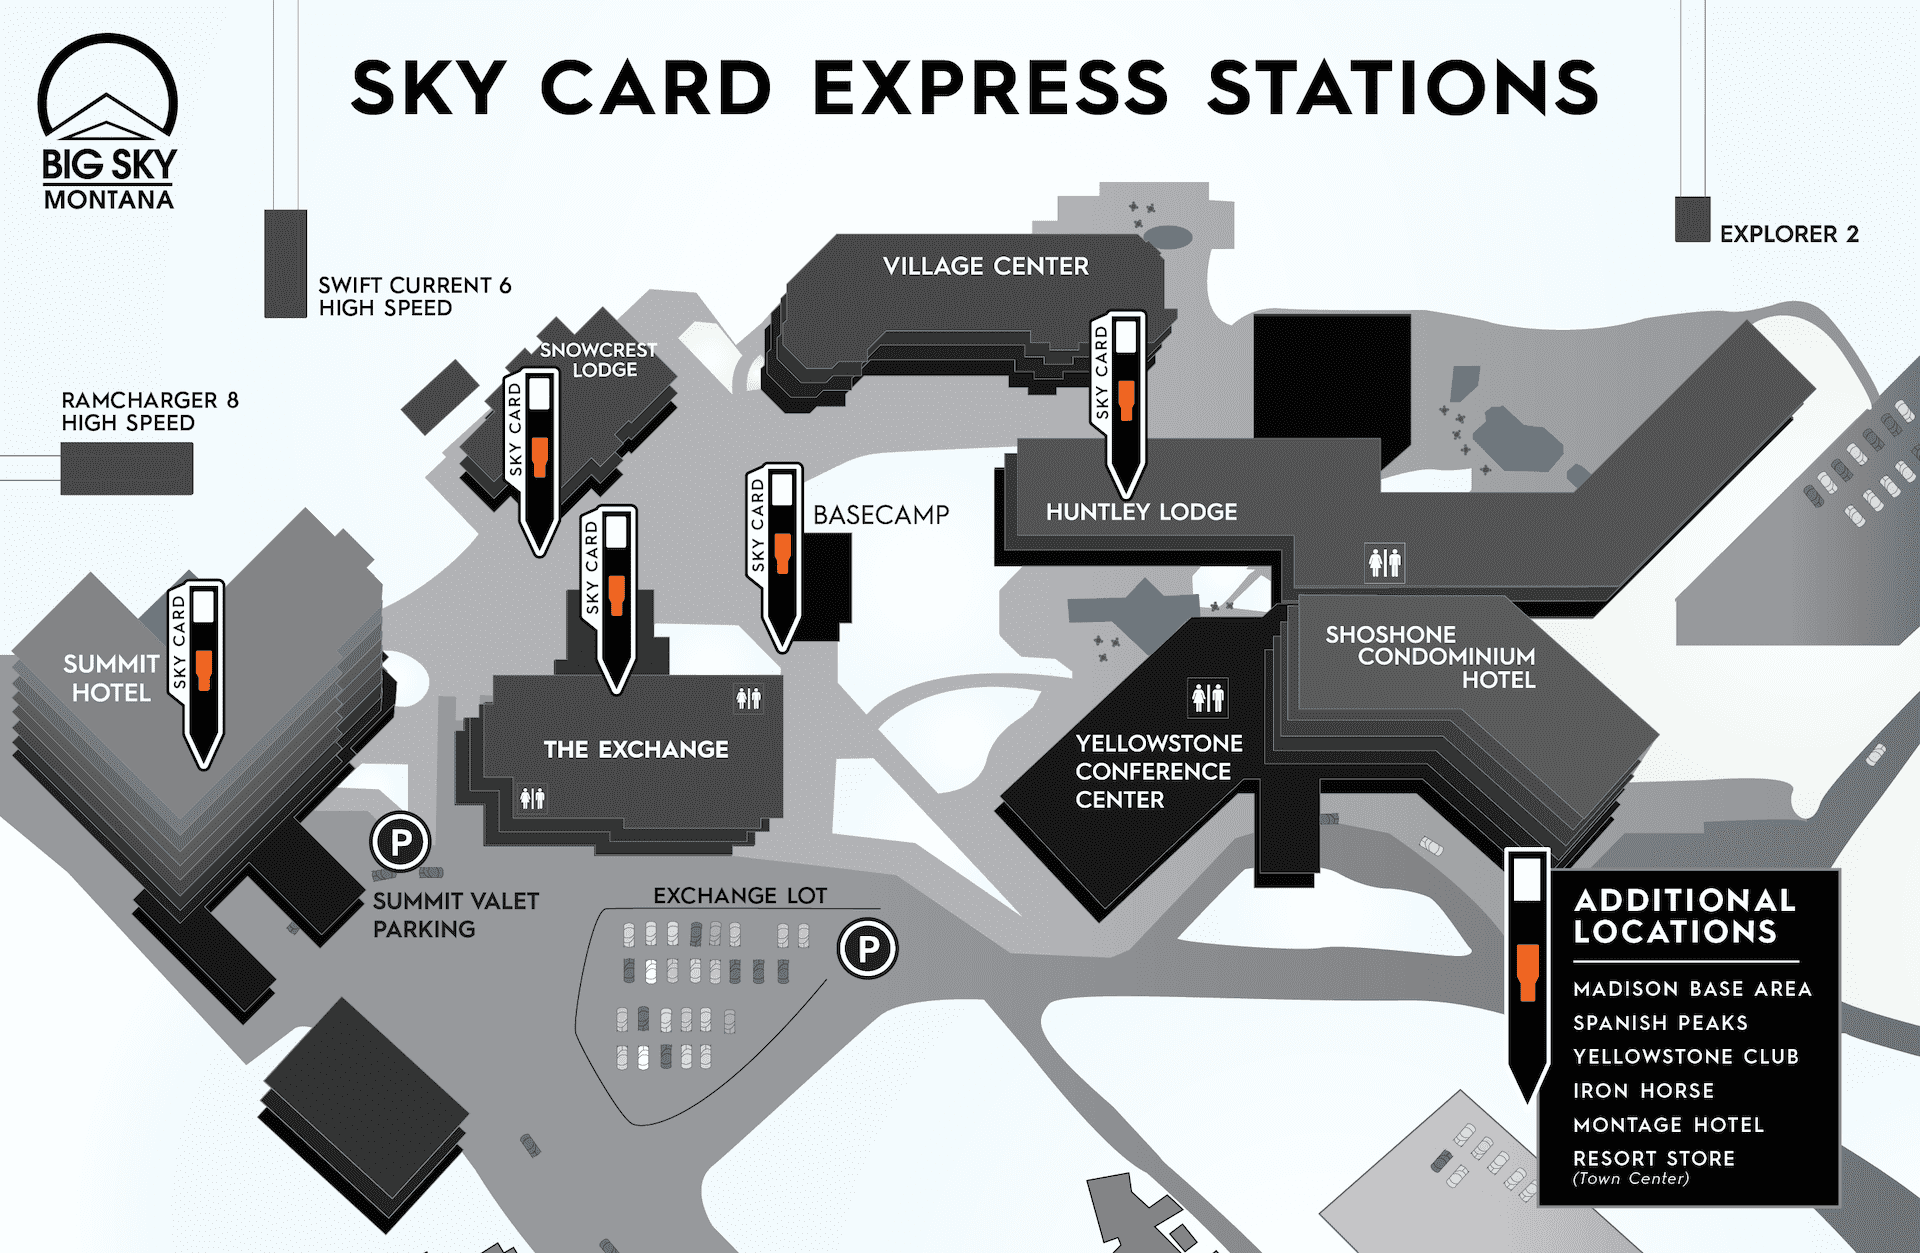 Map of Mountain Village Depicting Sky Card Express Station Locations